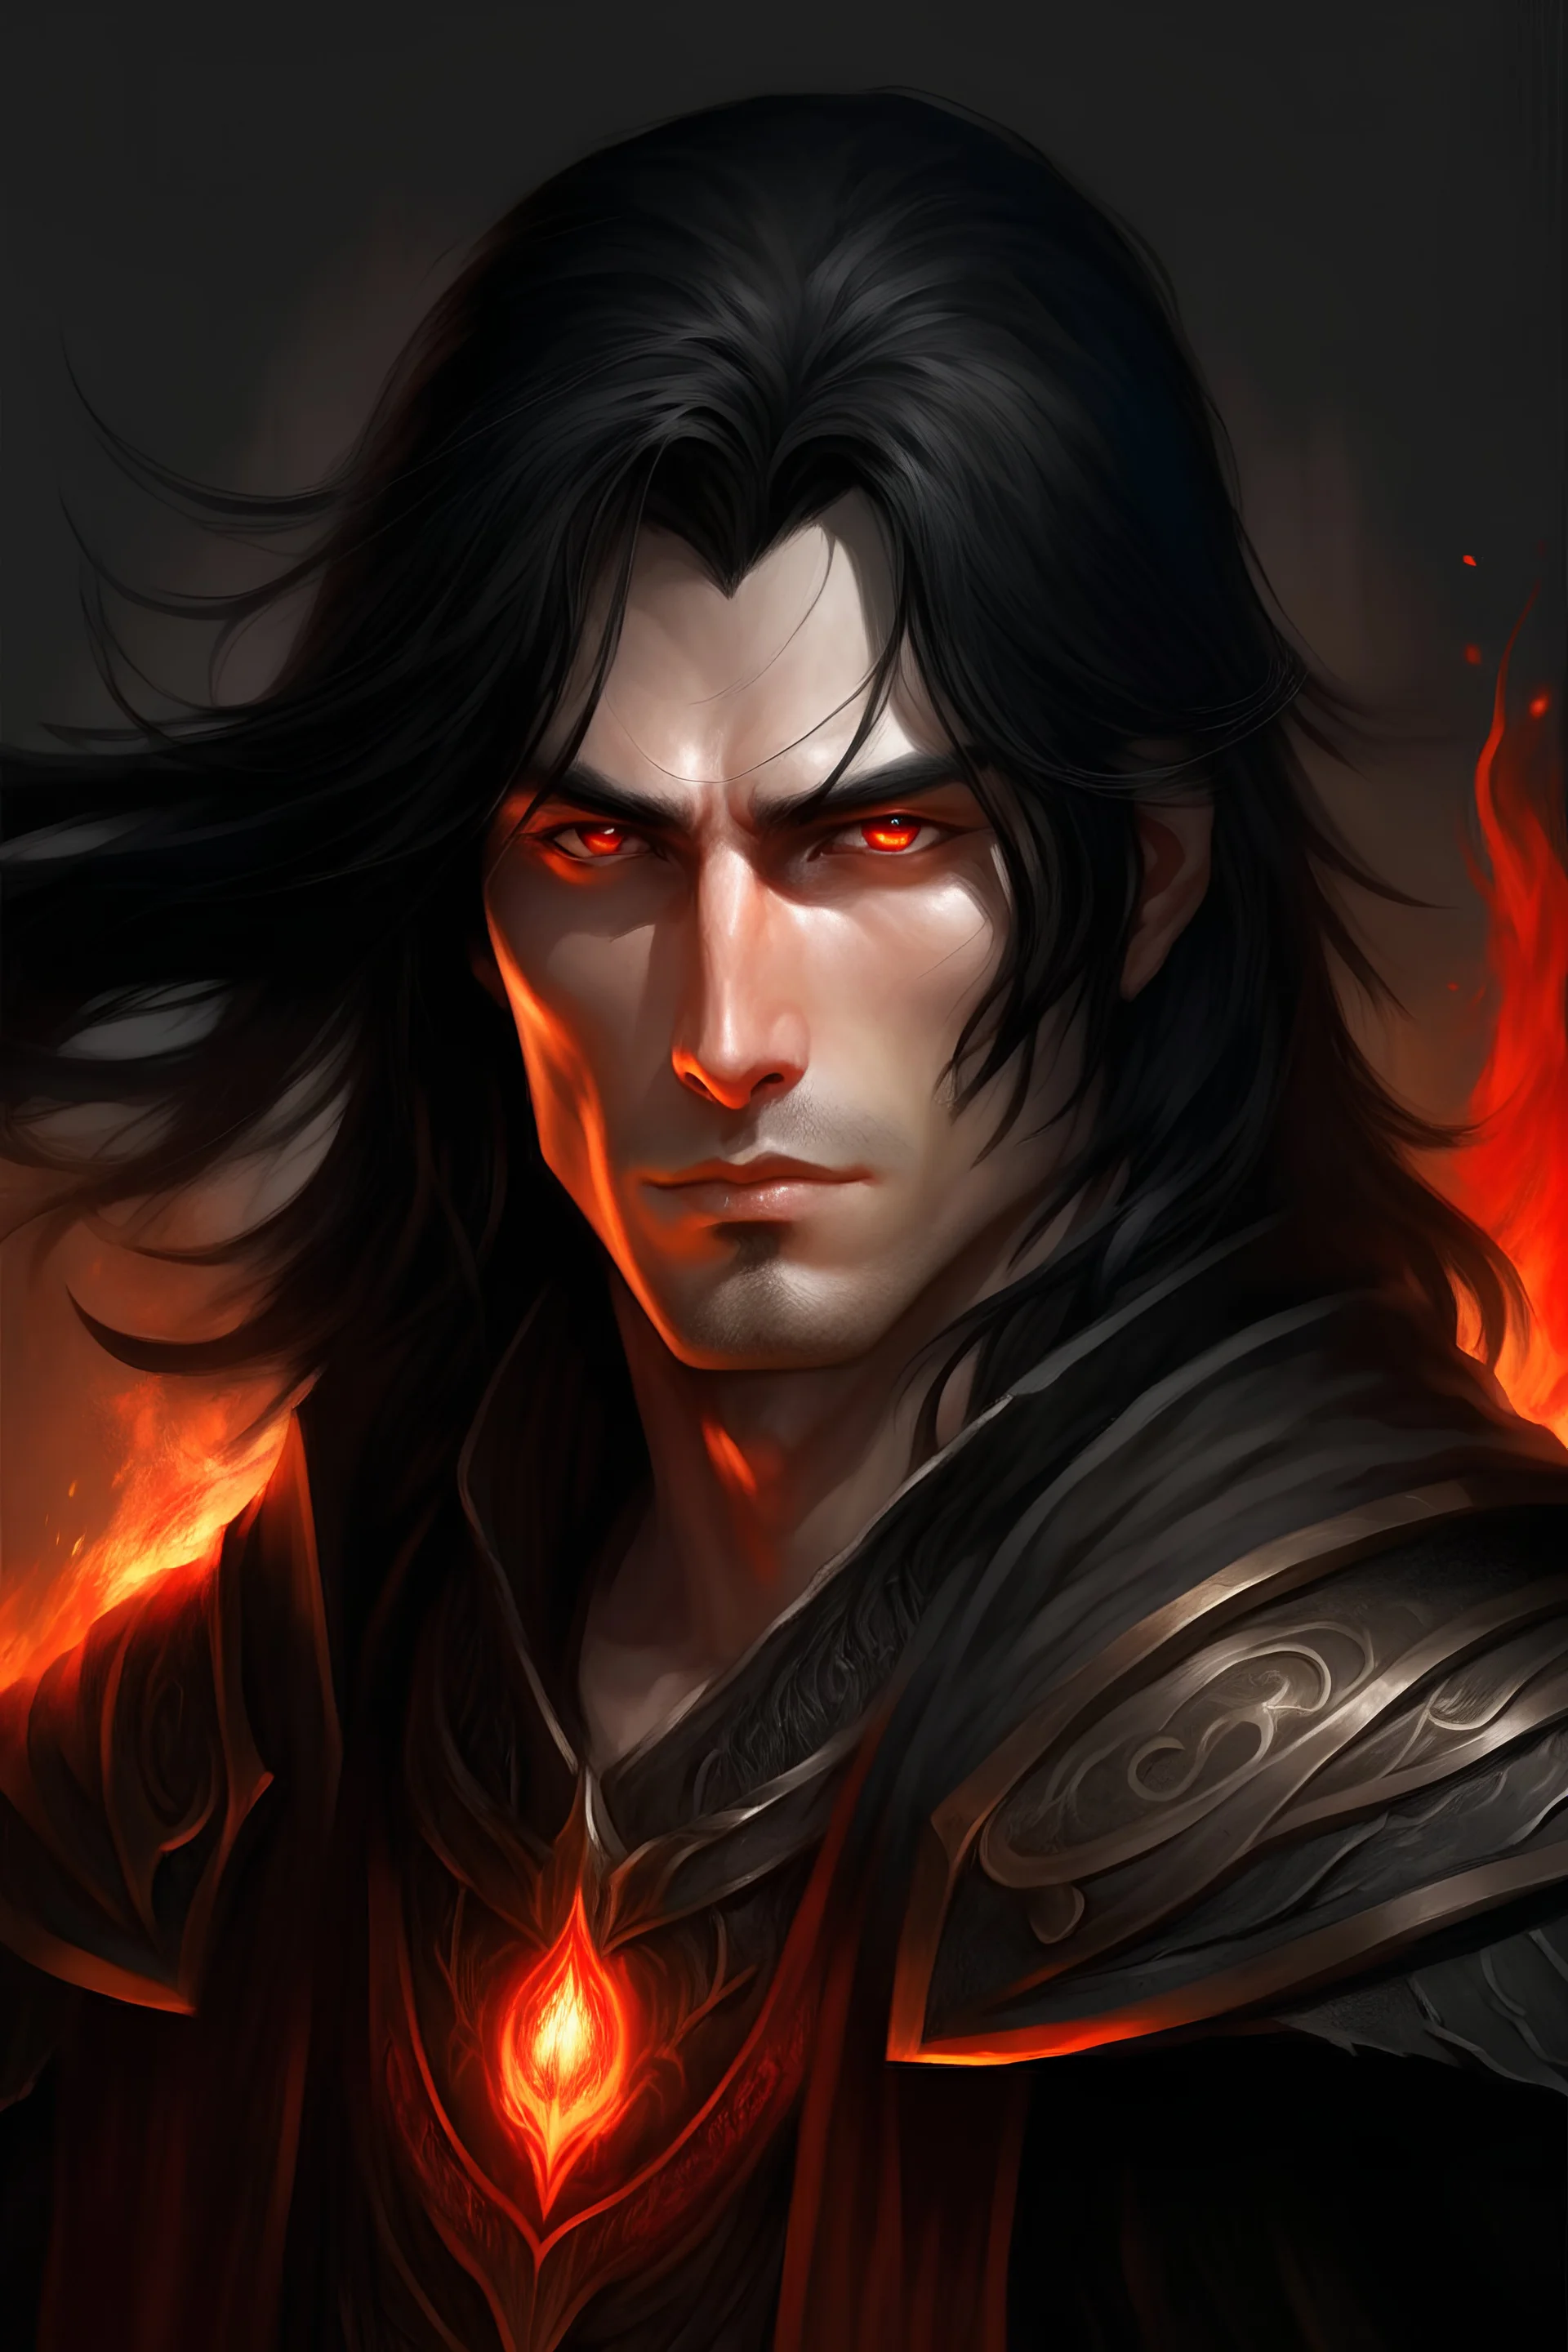 A striking fantasy Lord Of The Rings like man with mid-length black hair, exuding an air of aggression. His fiery red eyes hint at mystery and intelligence.